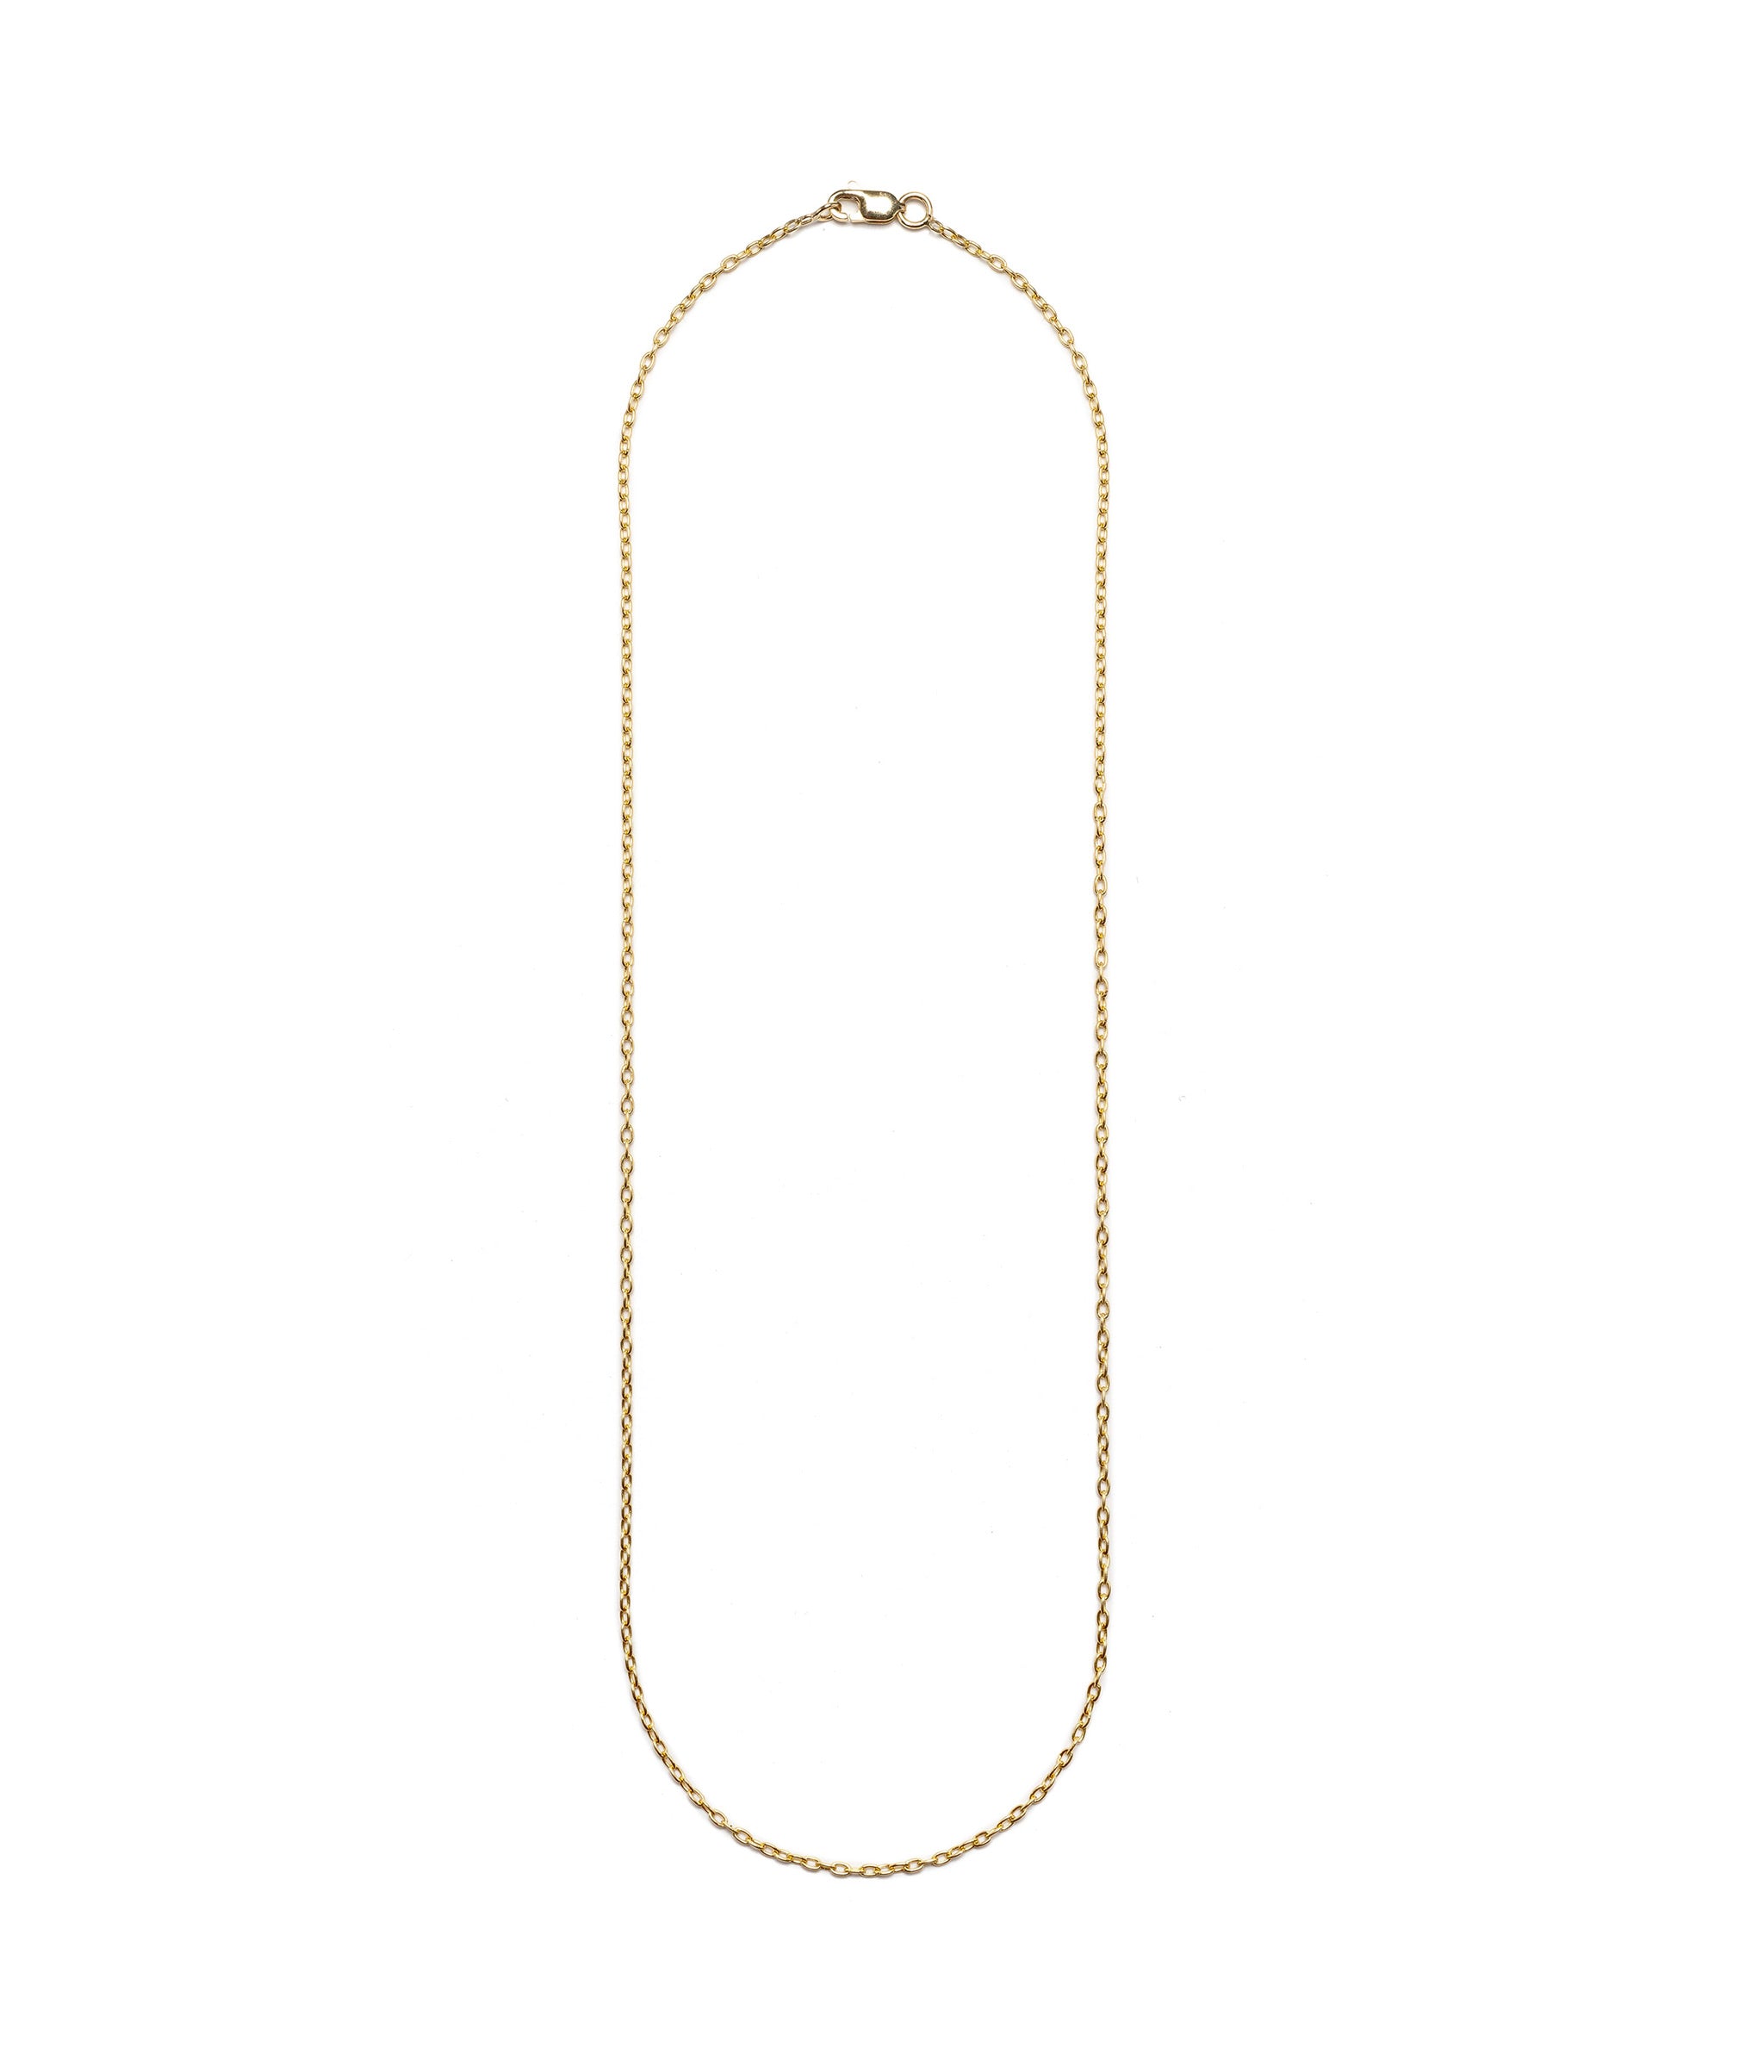 14K Gold Delicate Chain Necklace. Fine 14k yellow gold light round cable chain with gold closure.